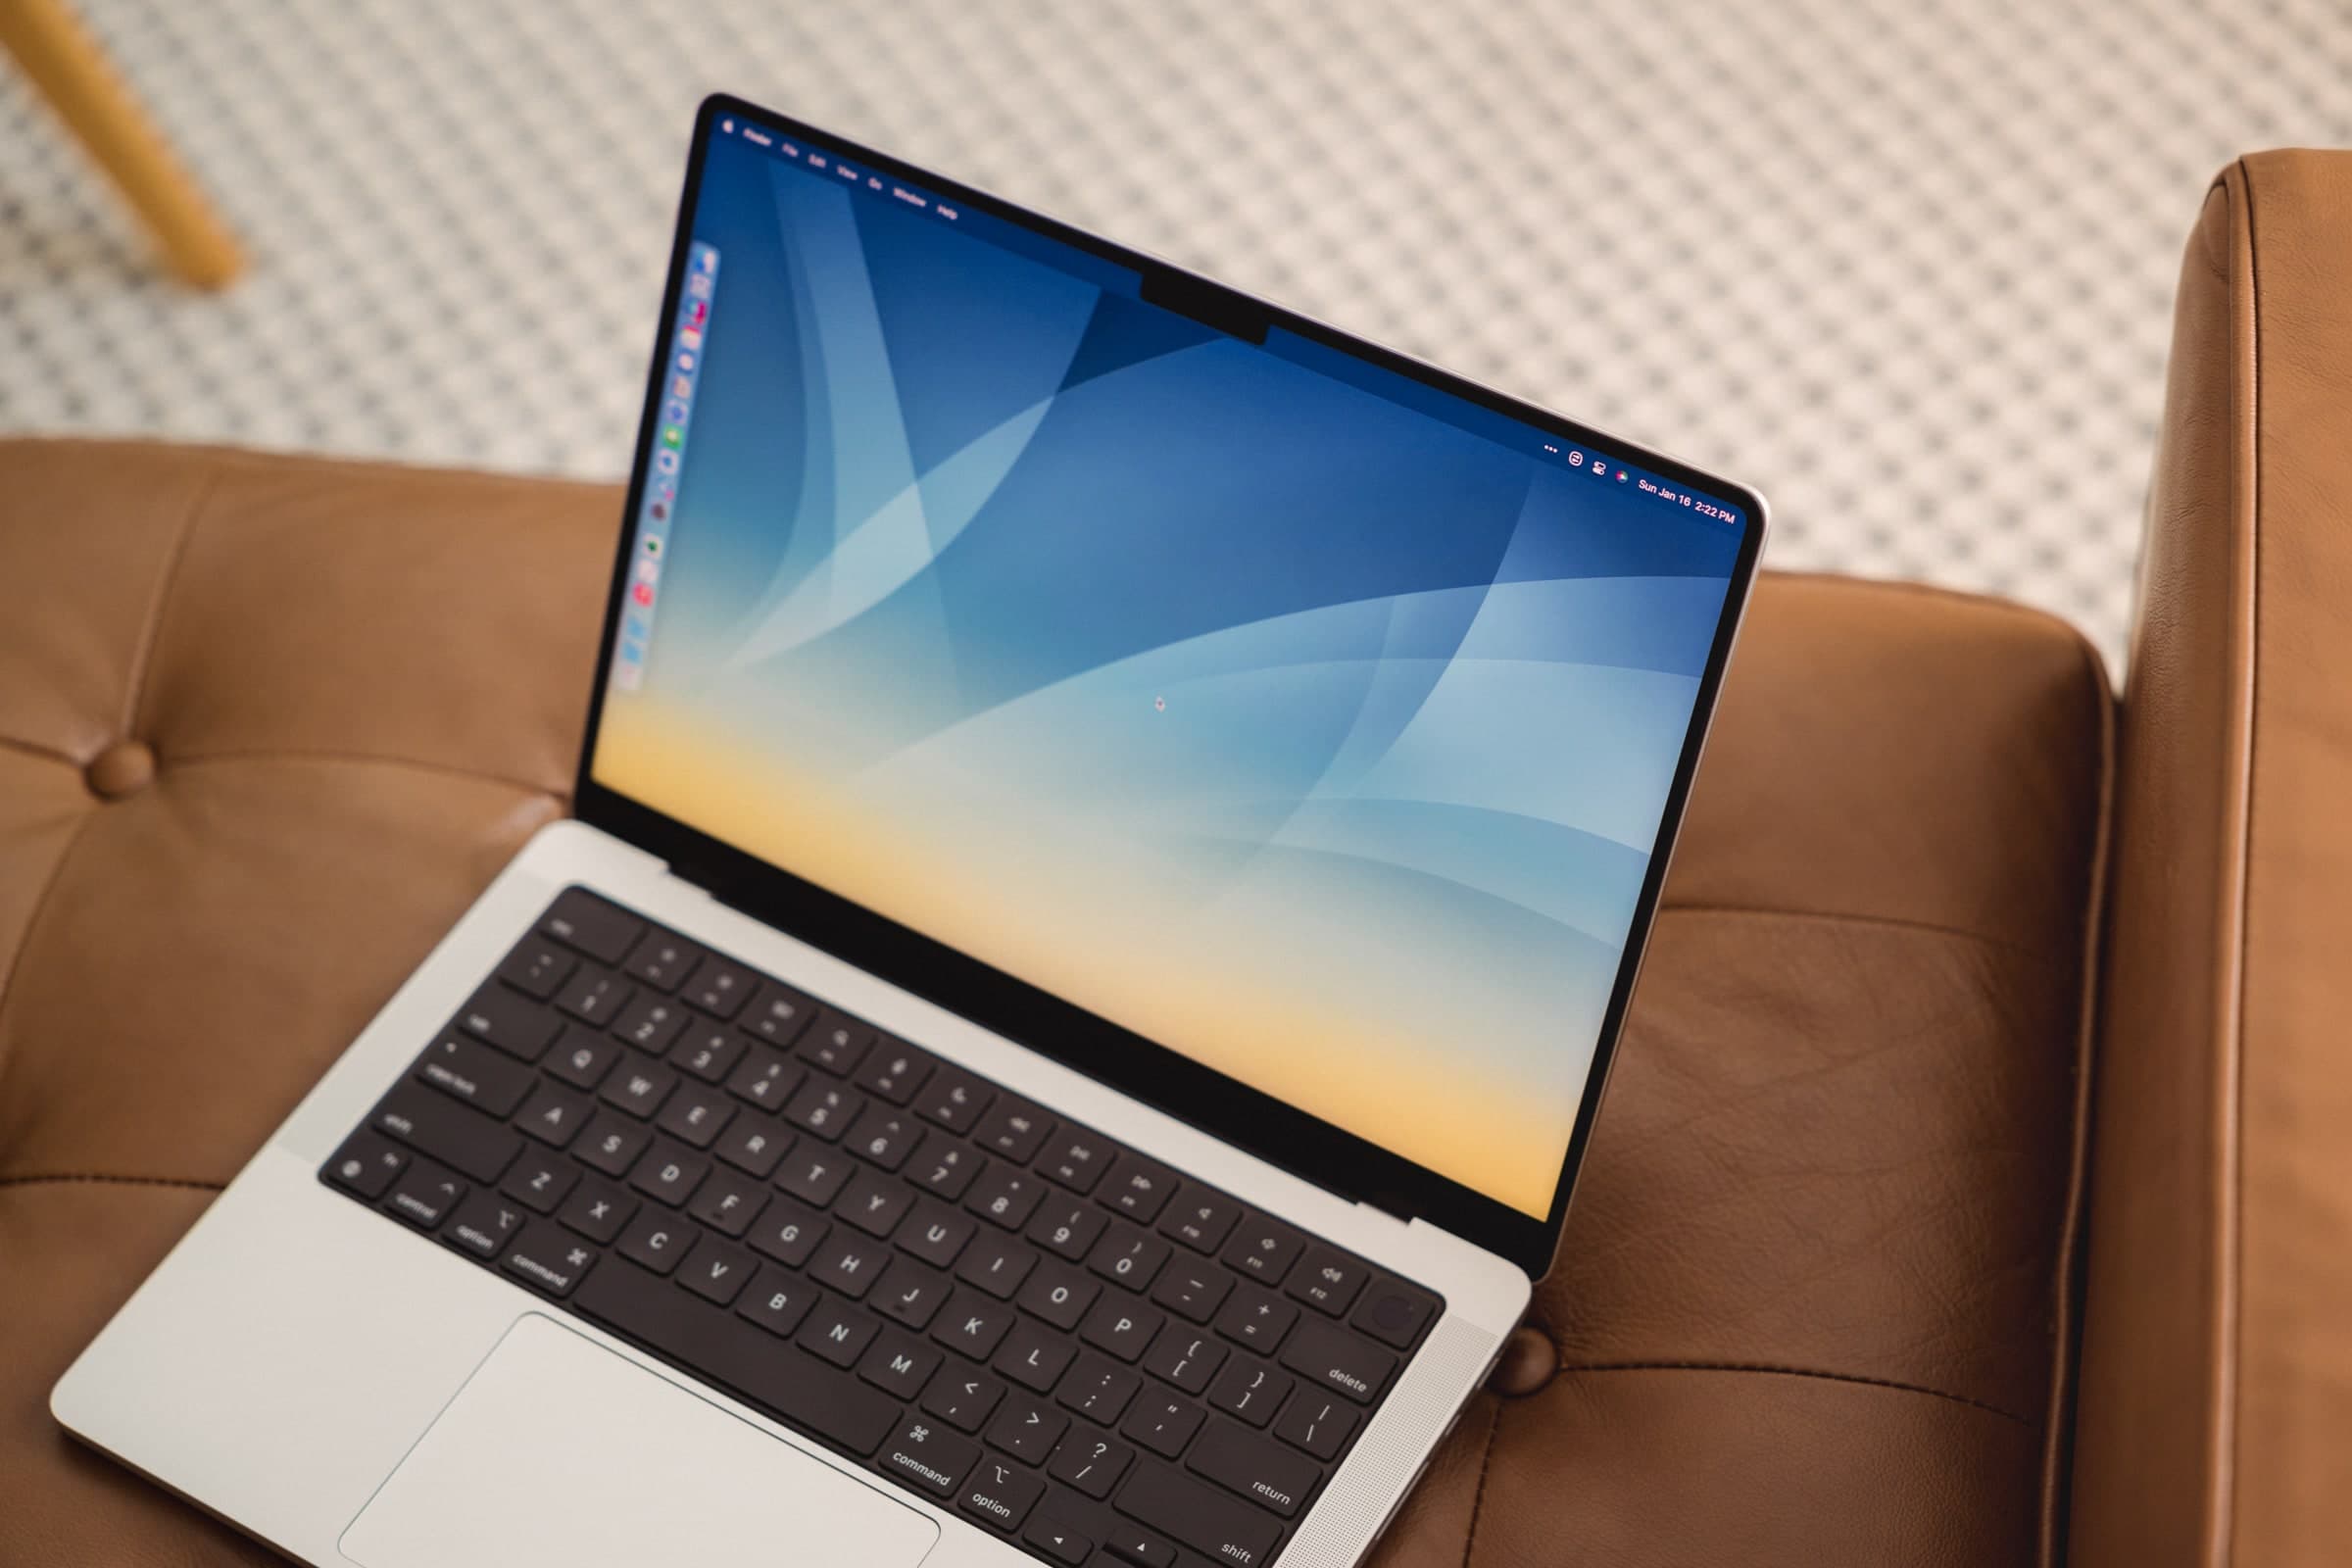 Bartender 4 Is a Must-Have App for Any MacBook Pro With a Notch